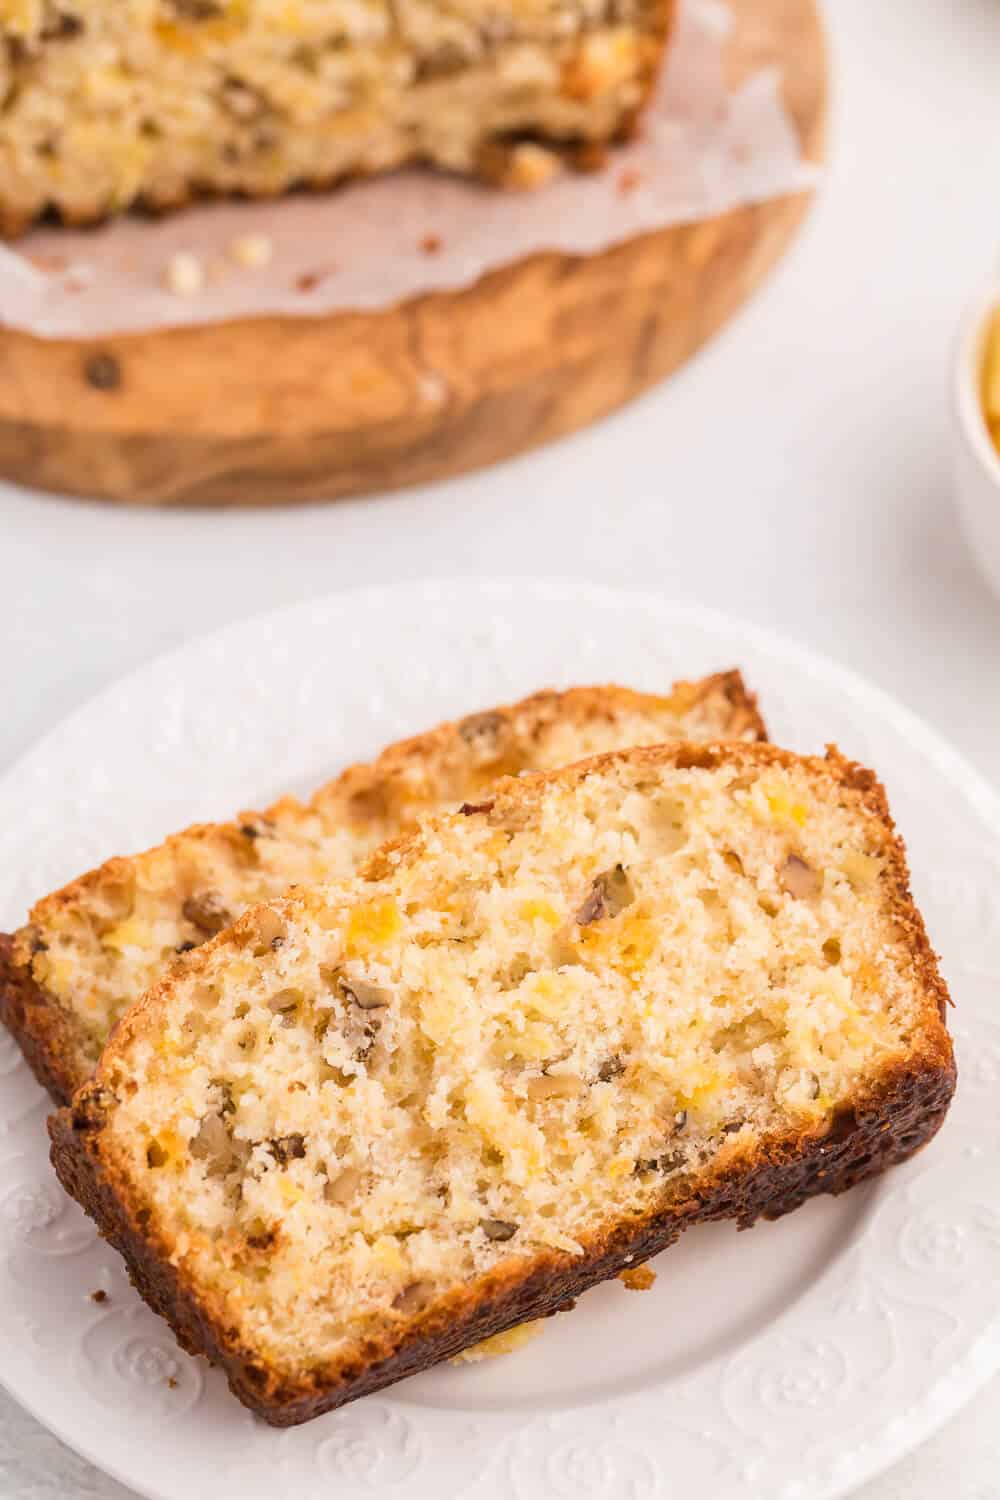 Pineapple Cheese Bread - This quick bread recipe reminds me of a Pineapple Cheese Salad my great grandmother used to make. 